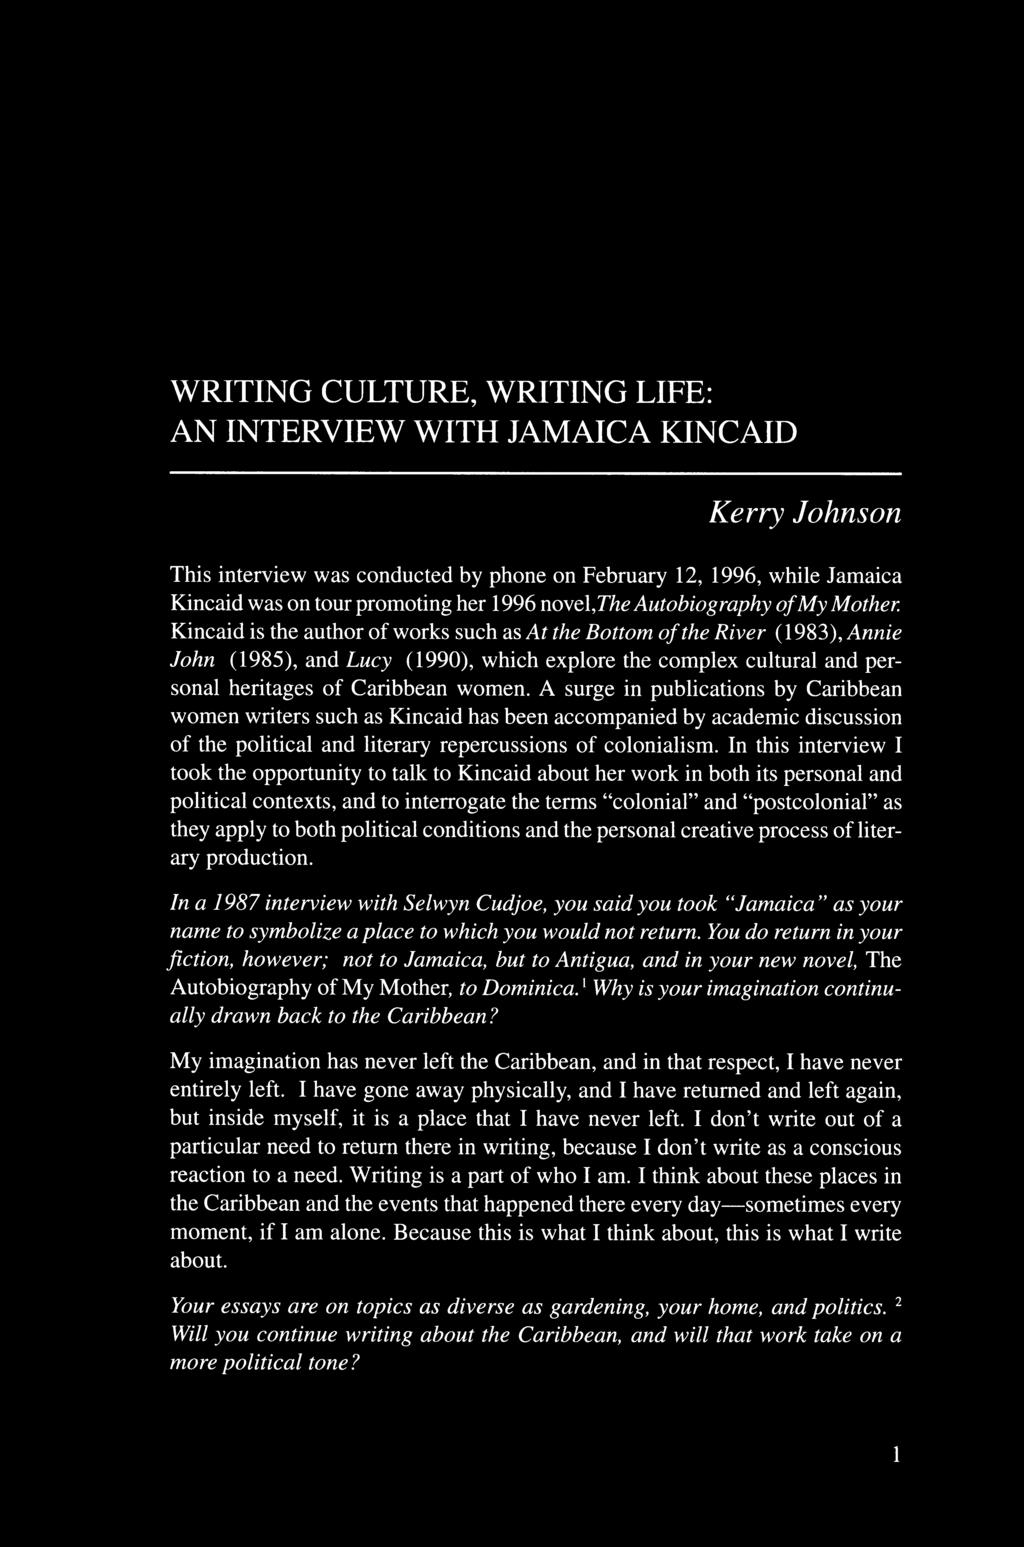 Kincaid is the author of works such as At the Bottom o f the River (1983), Annie John (1985), and Lucy (1990), which explore the complex cultural and personal heritages of Caribbean women.